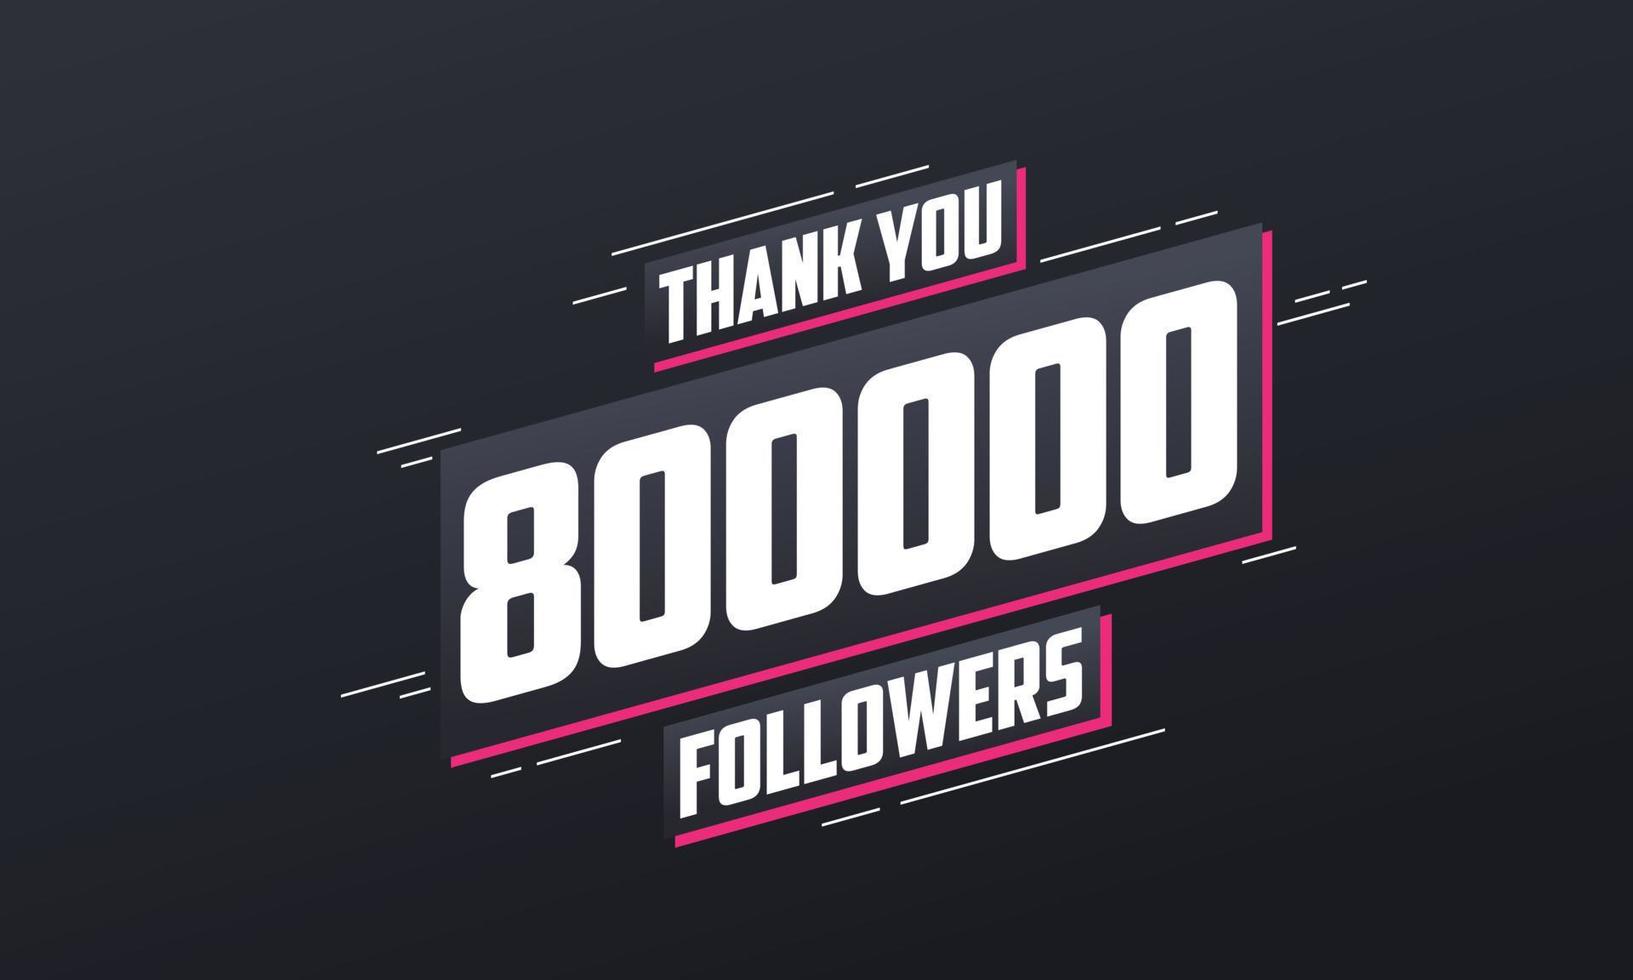 Thank you 800,000 followers, Greeting card template for social networks. vector